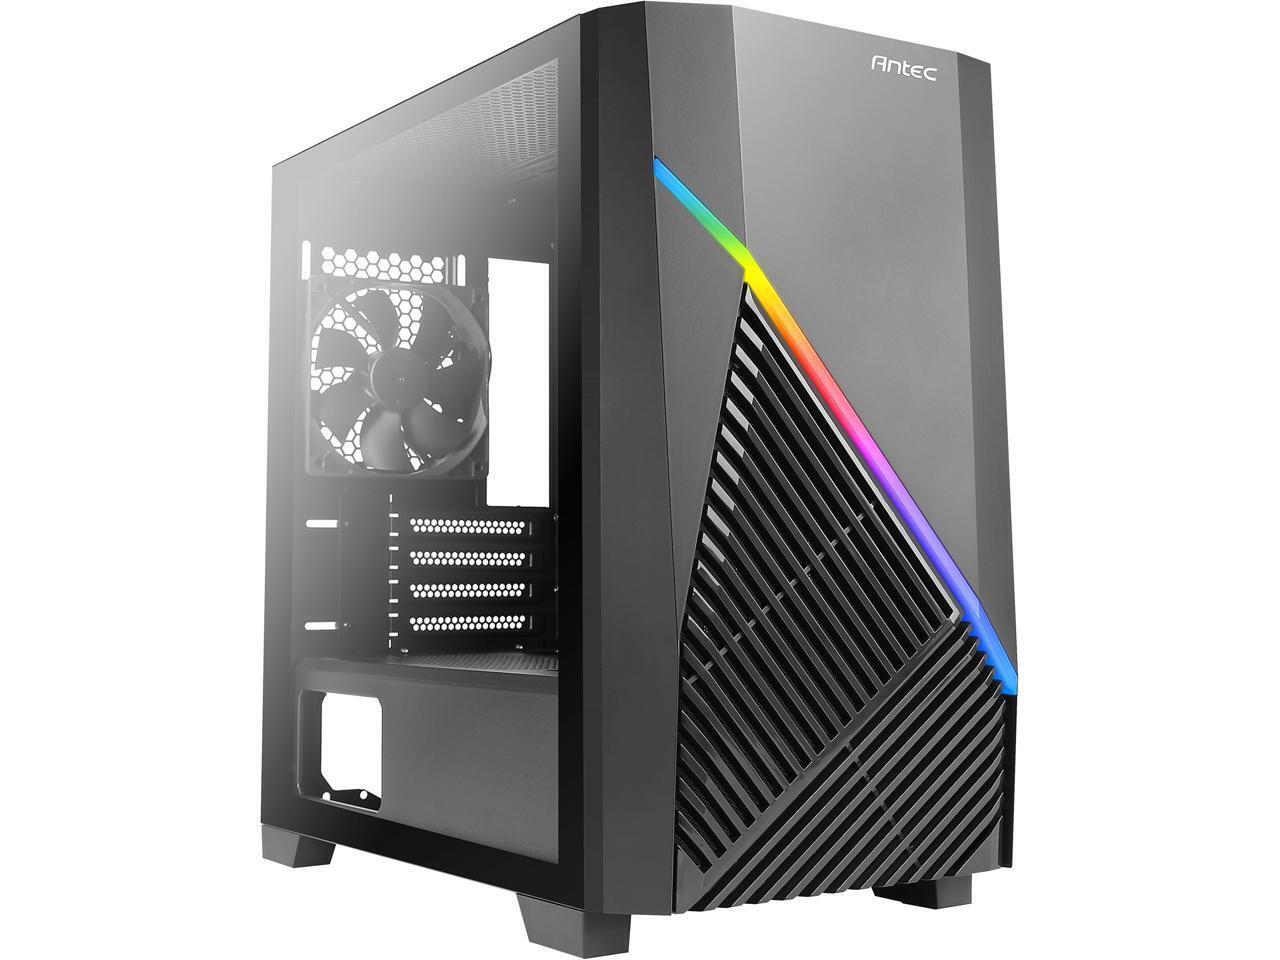 Antec Draco10 Constellation Series Mini Tower Case- Tempered Glass 1x120mm Fan